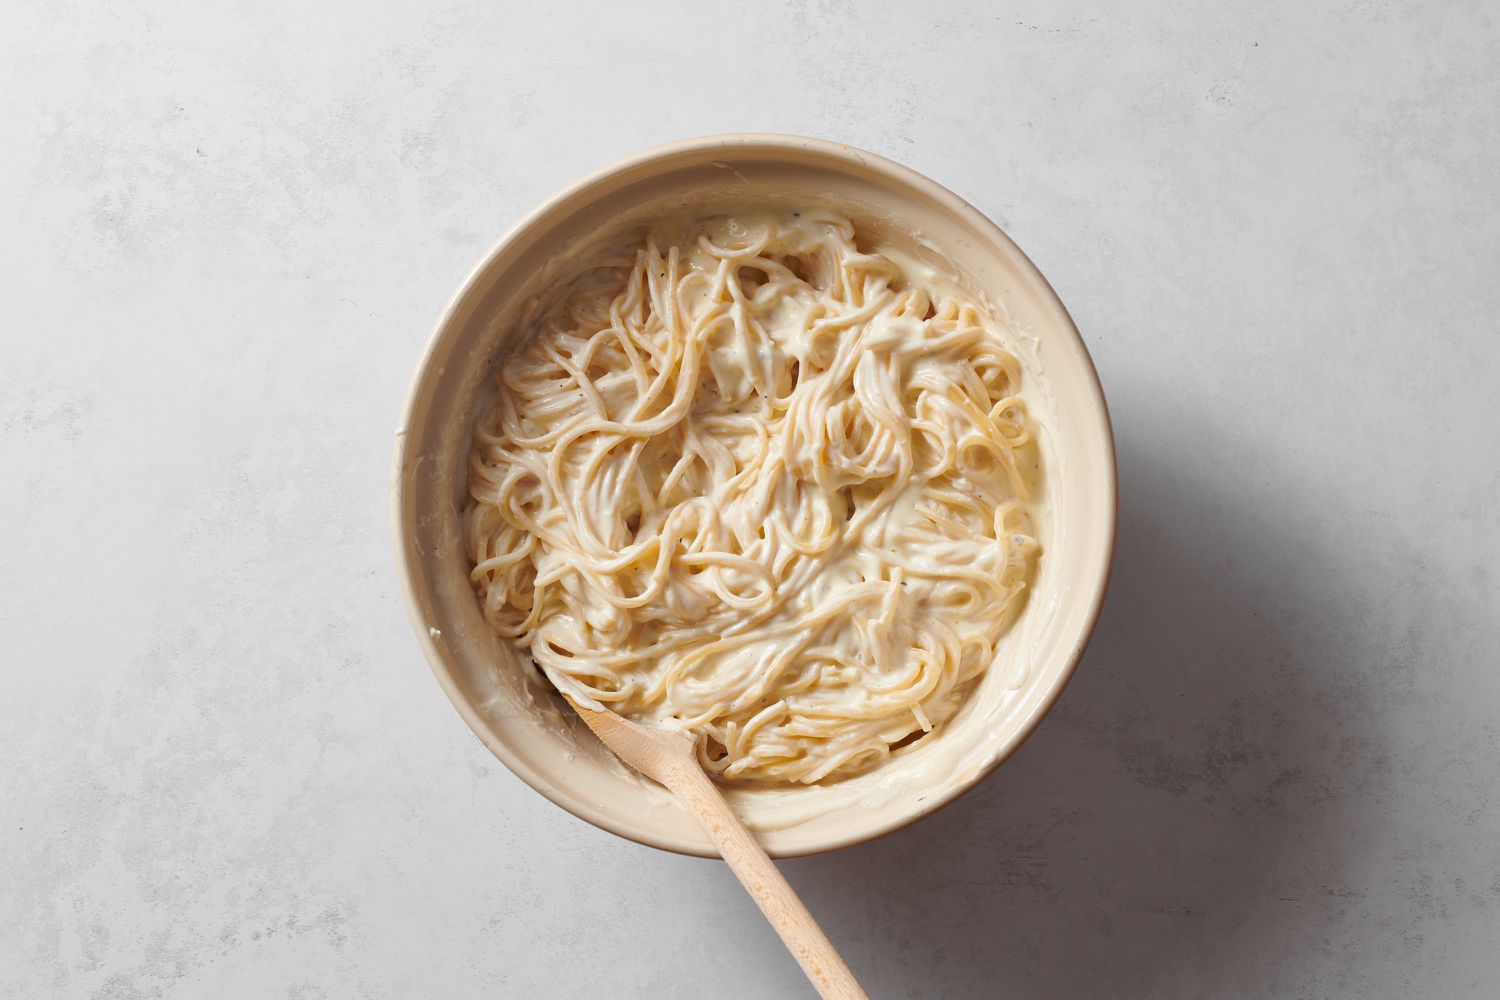 A bowl of spaghetti tossed in ricotta, cream cheese, eggs, and black pepper